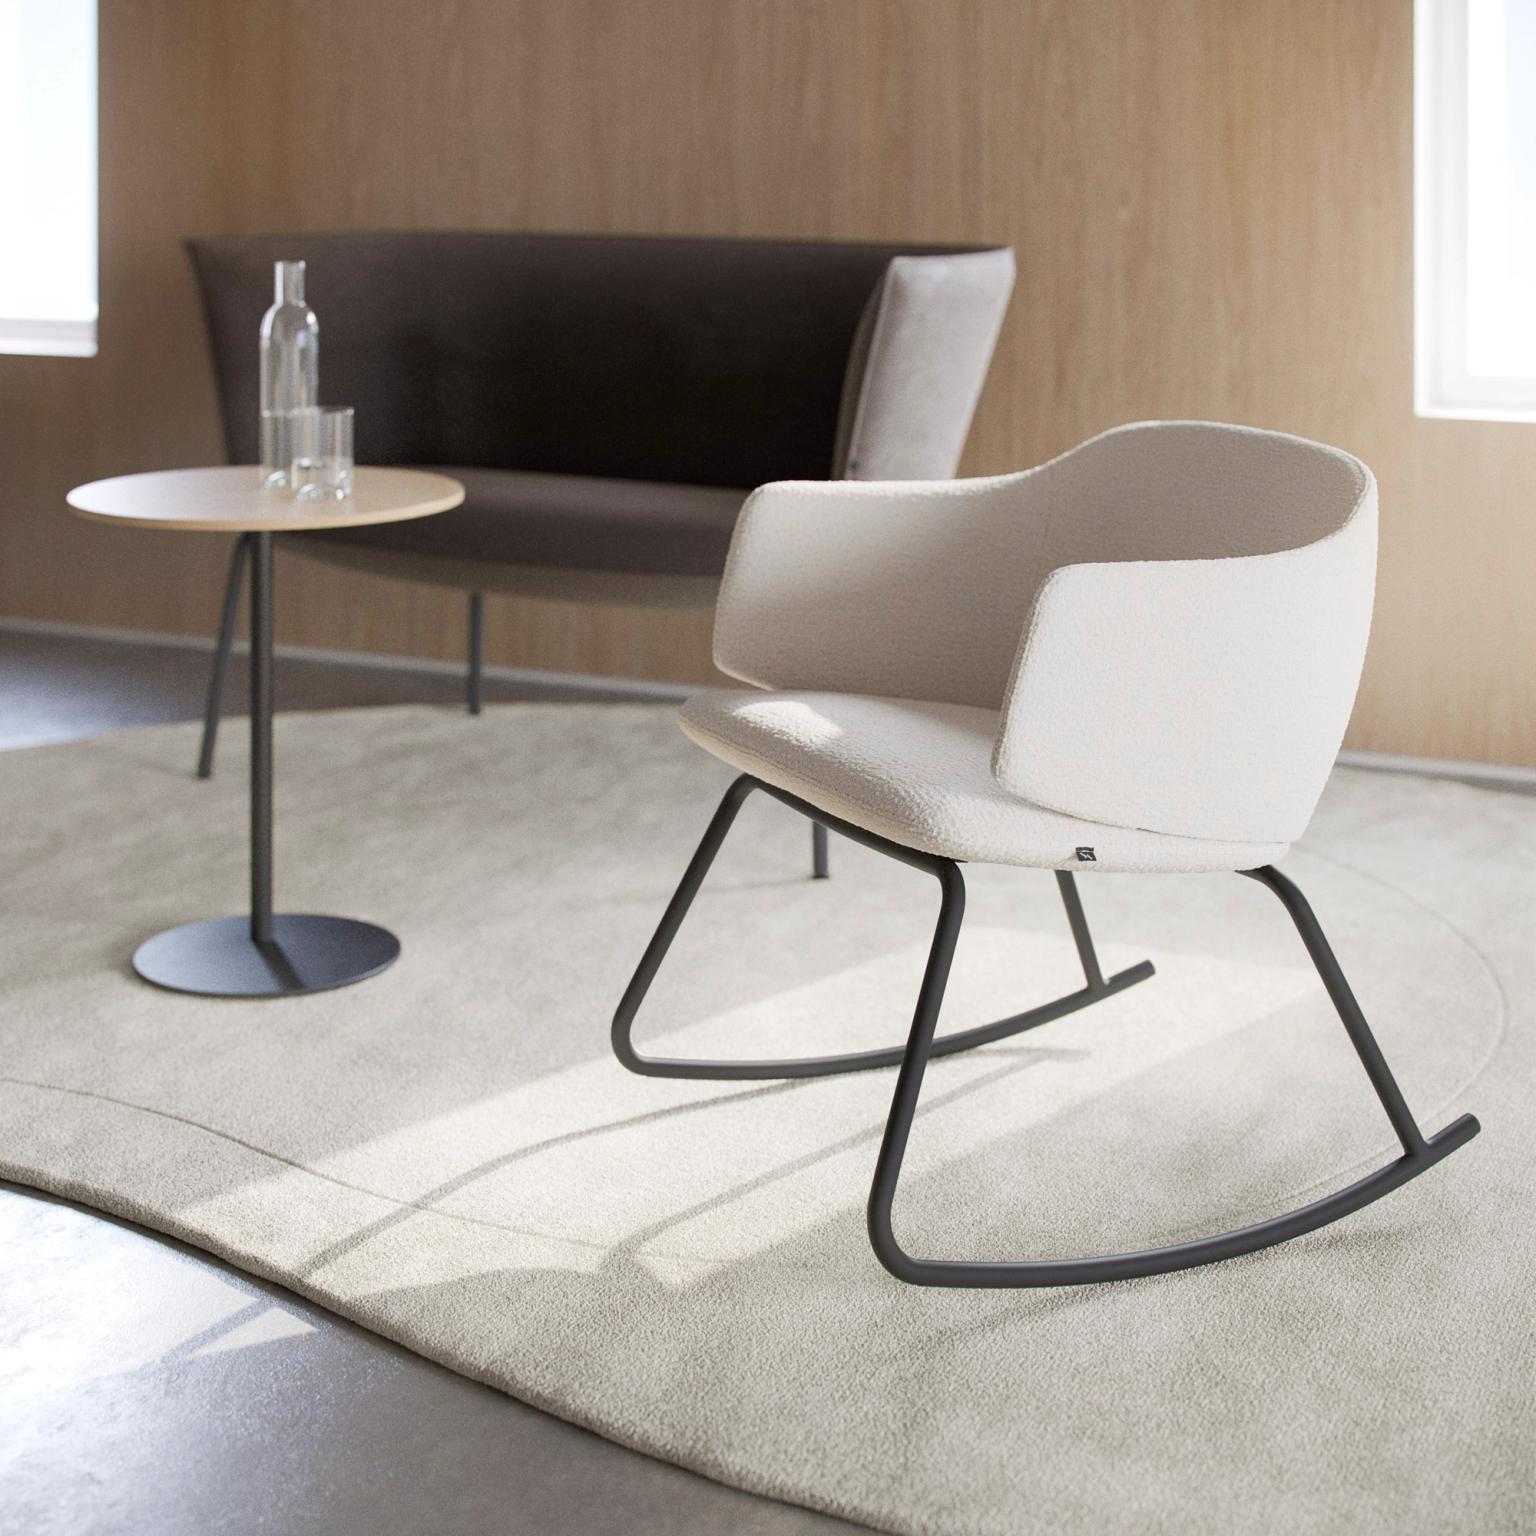 A functional, classic chair_Business-Norway_Design_Lifestyle_Sustainable_functional